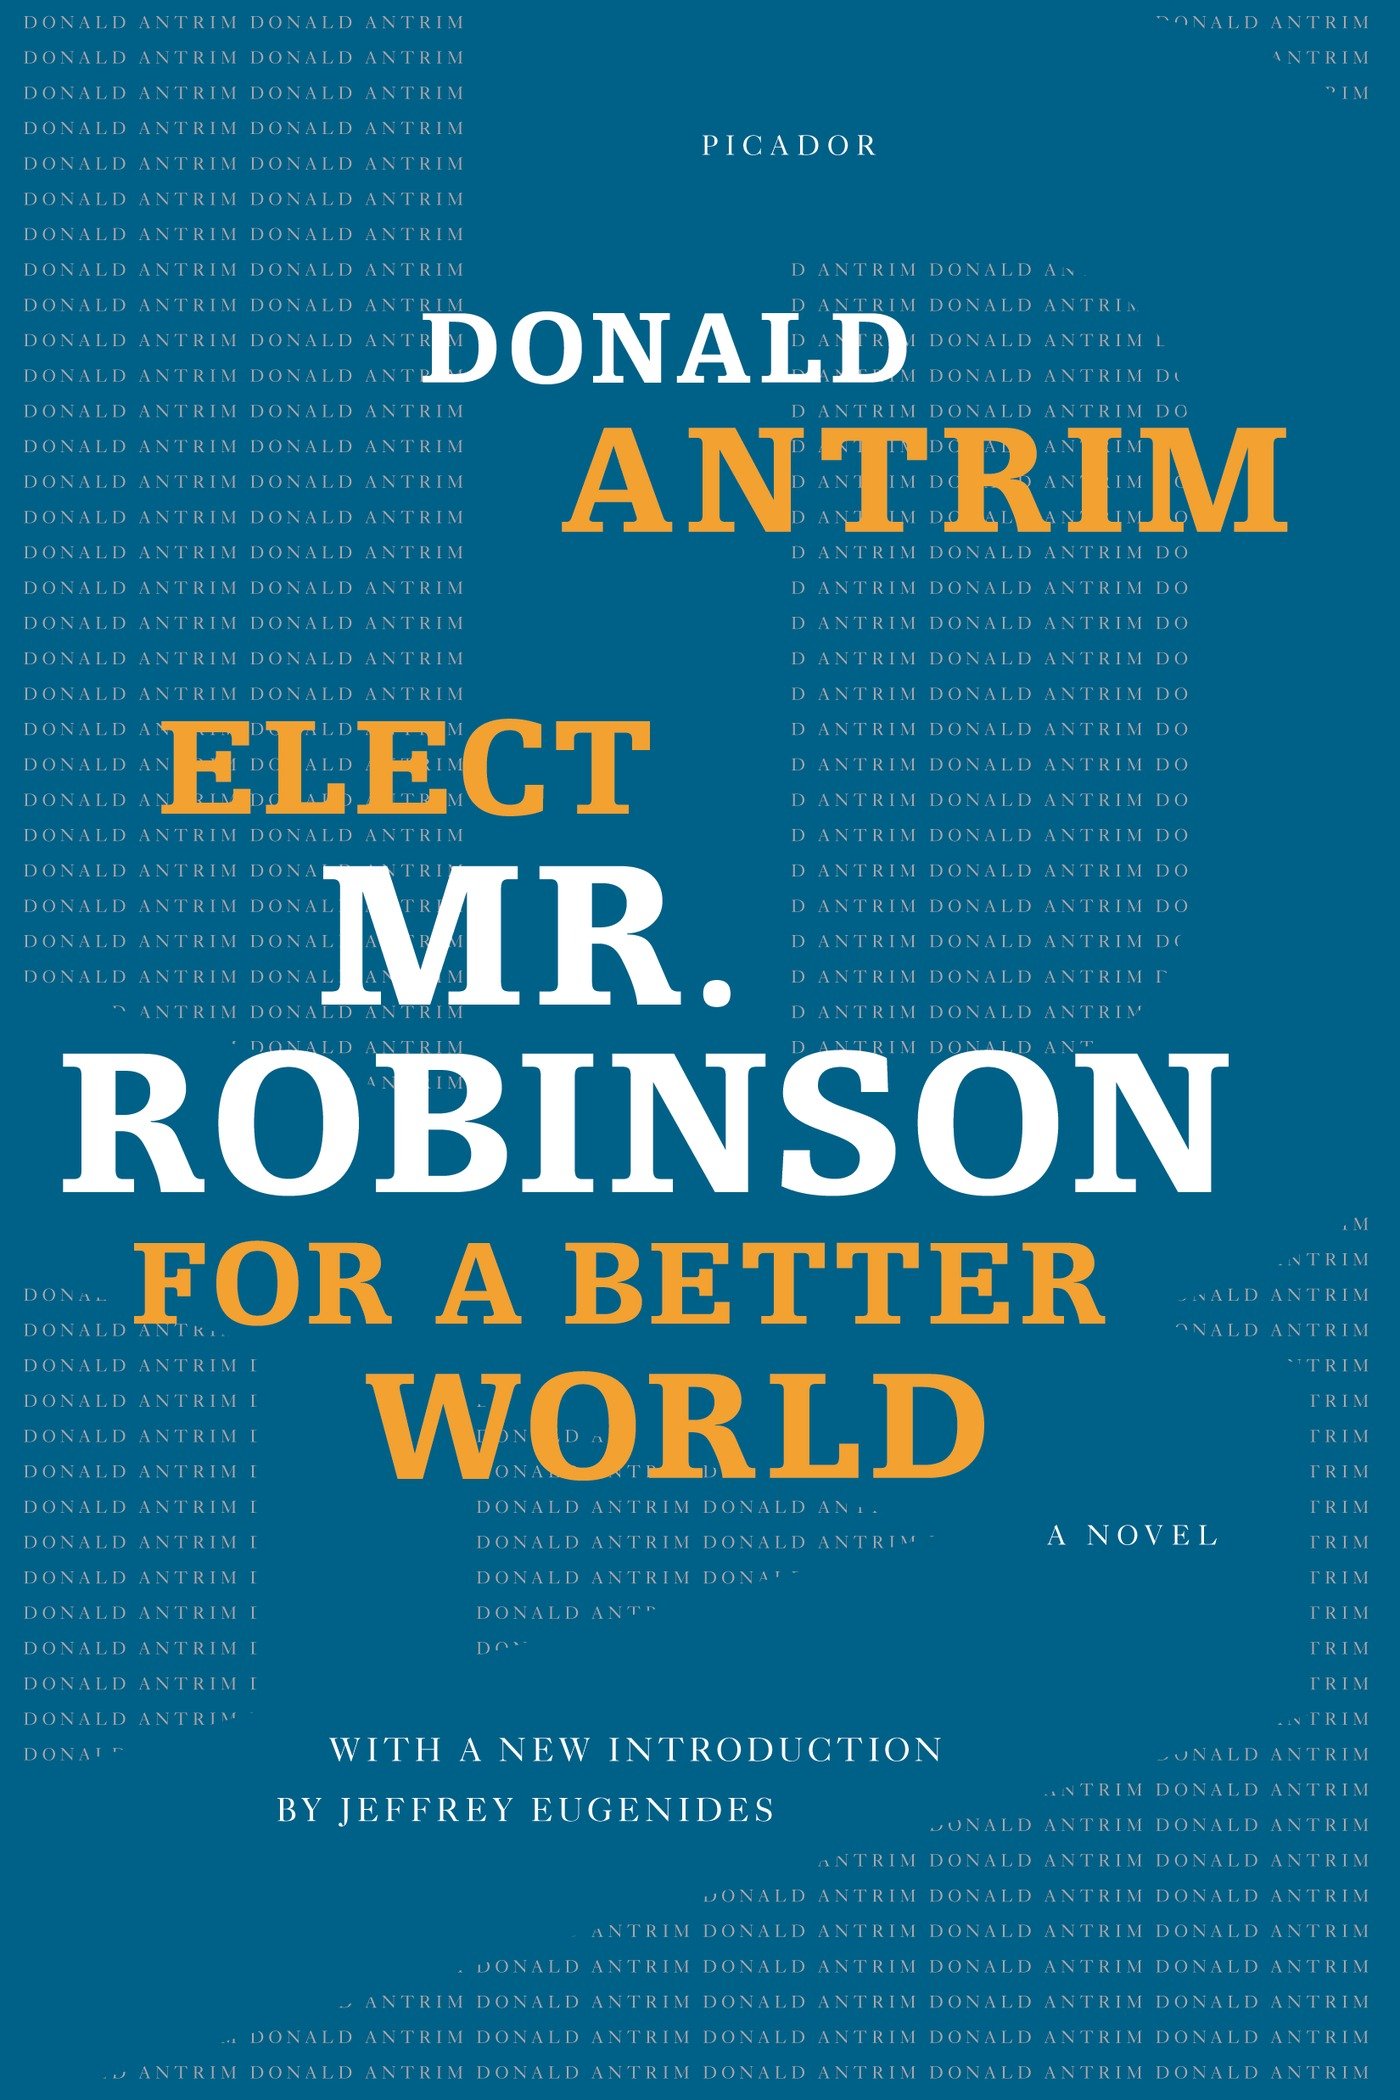 donald antrim elect mr. robinson for a better world